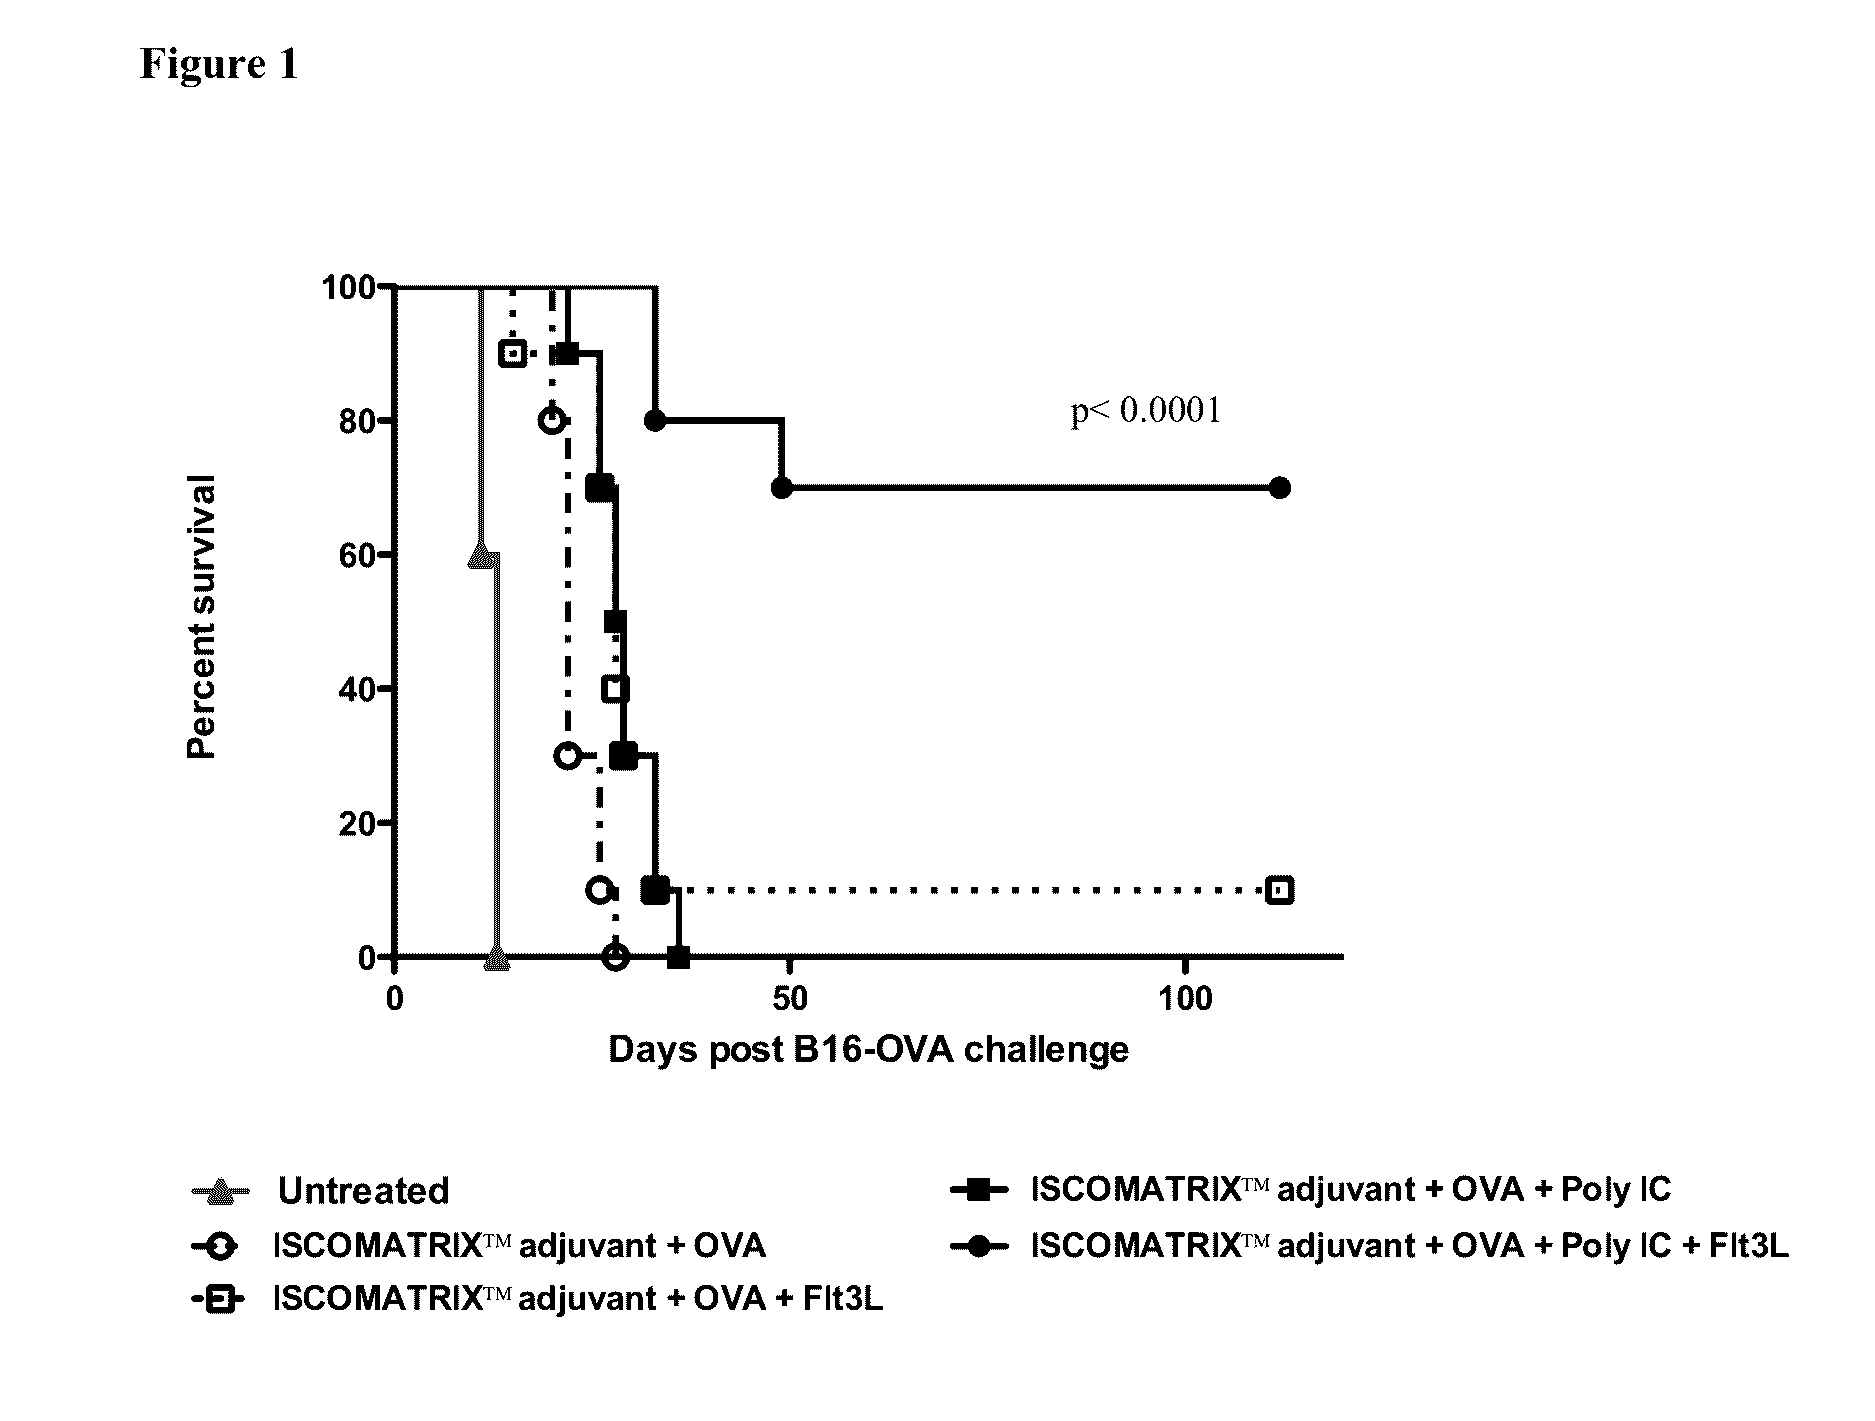 Anti-tumor compositions and uses thereof